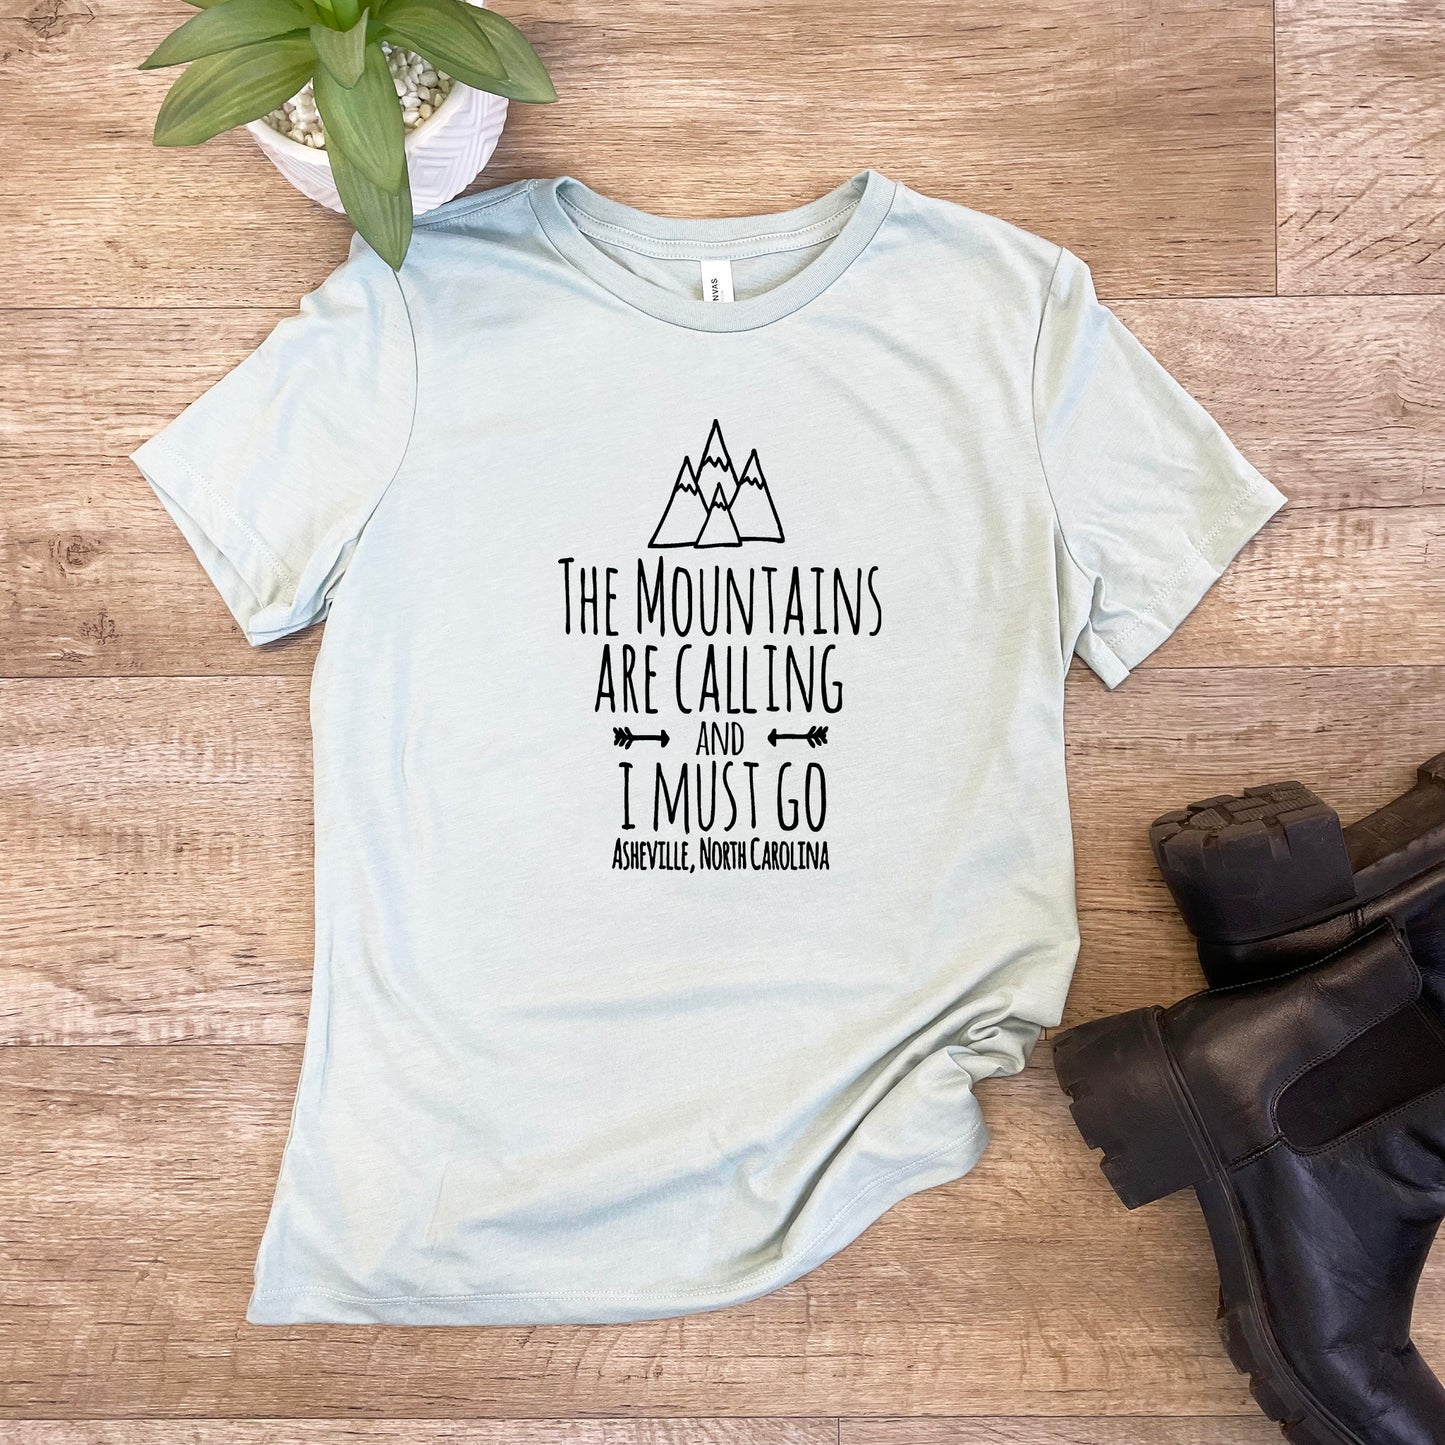 The Mountains Are Calling And I Must Go, Asheville North Carolina - Women's Crew Tee - Olive or Dusty Blue